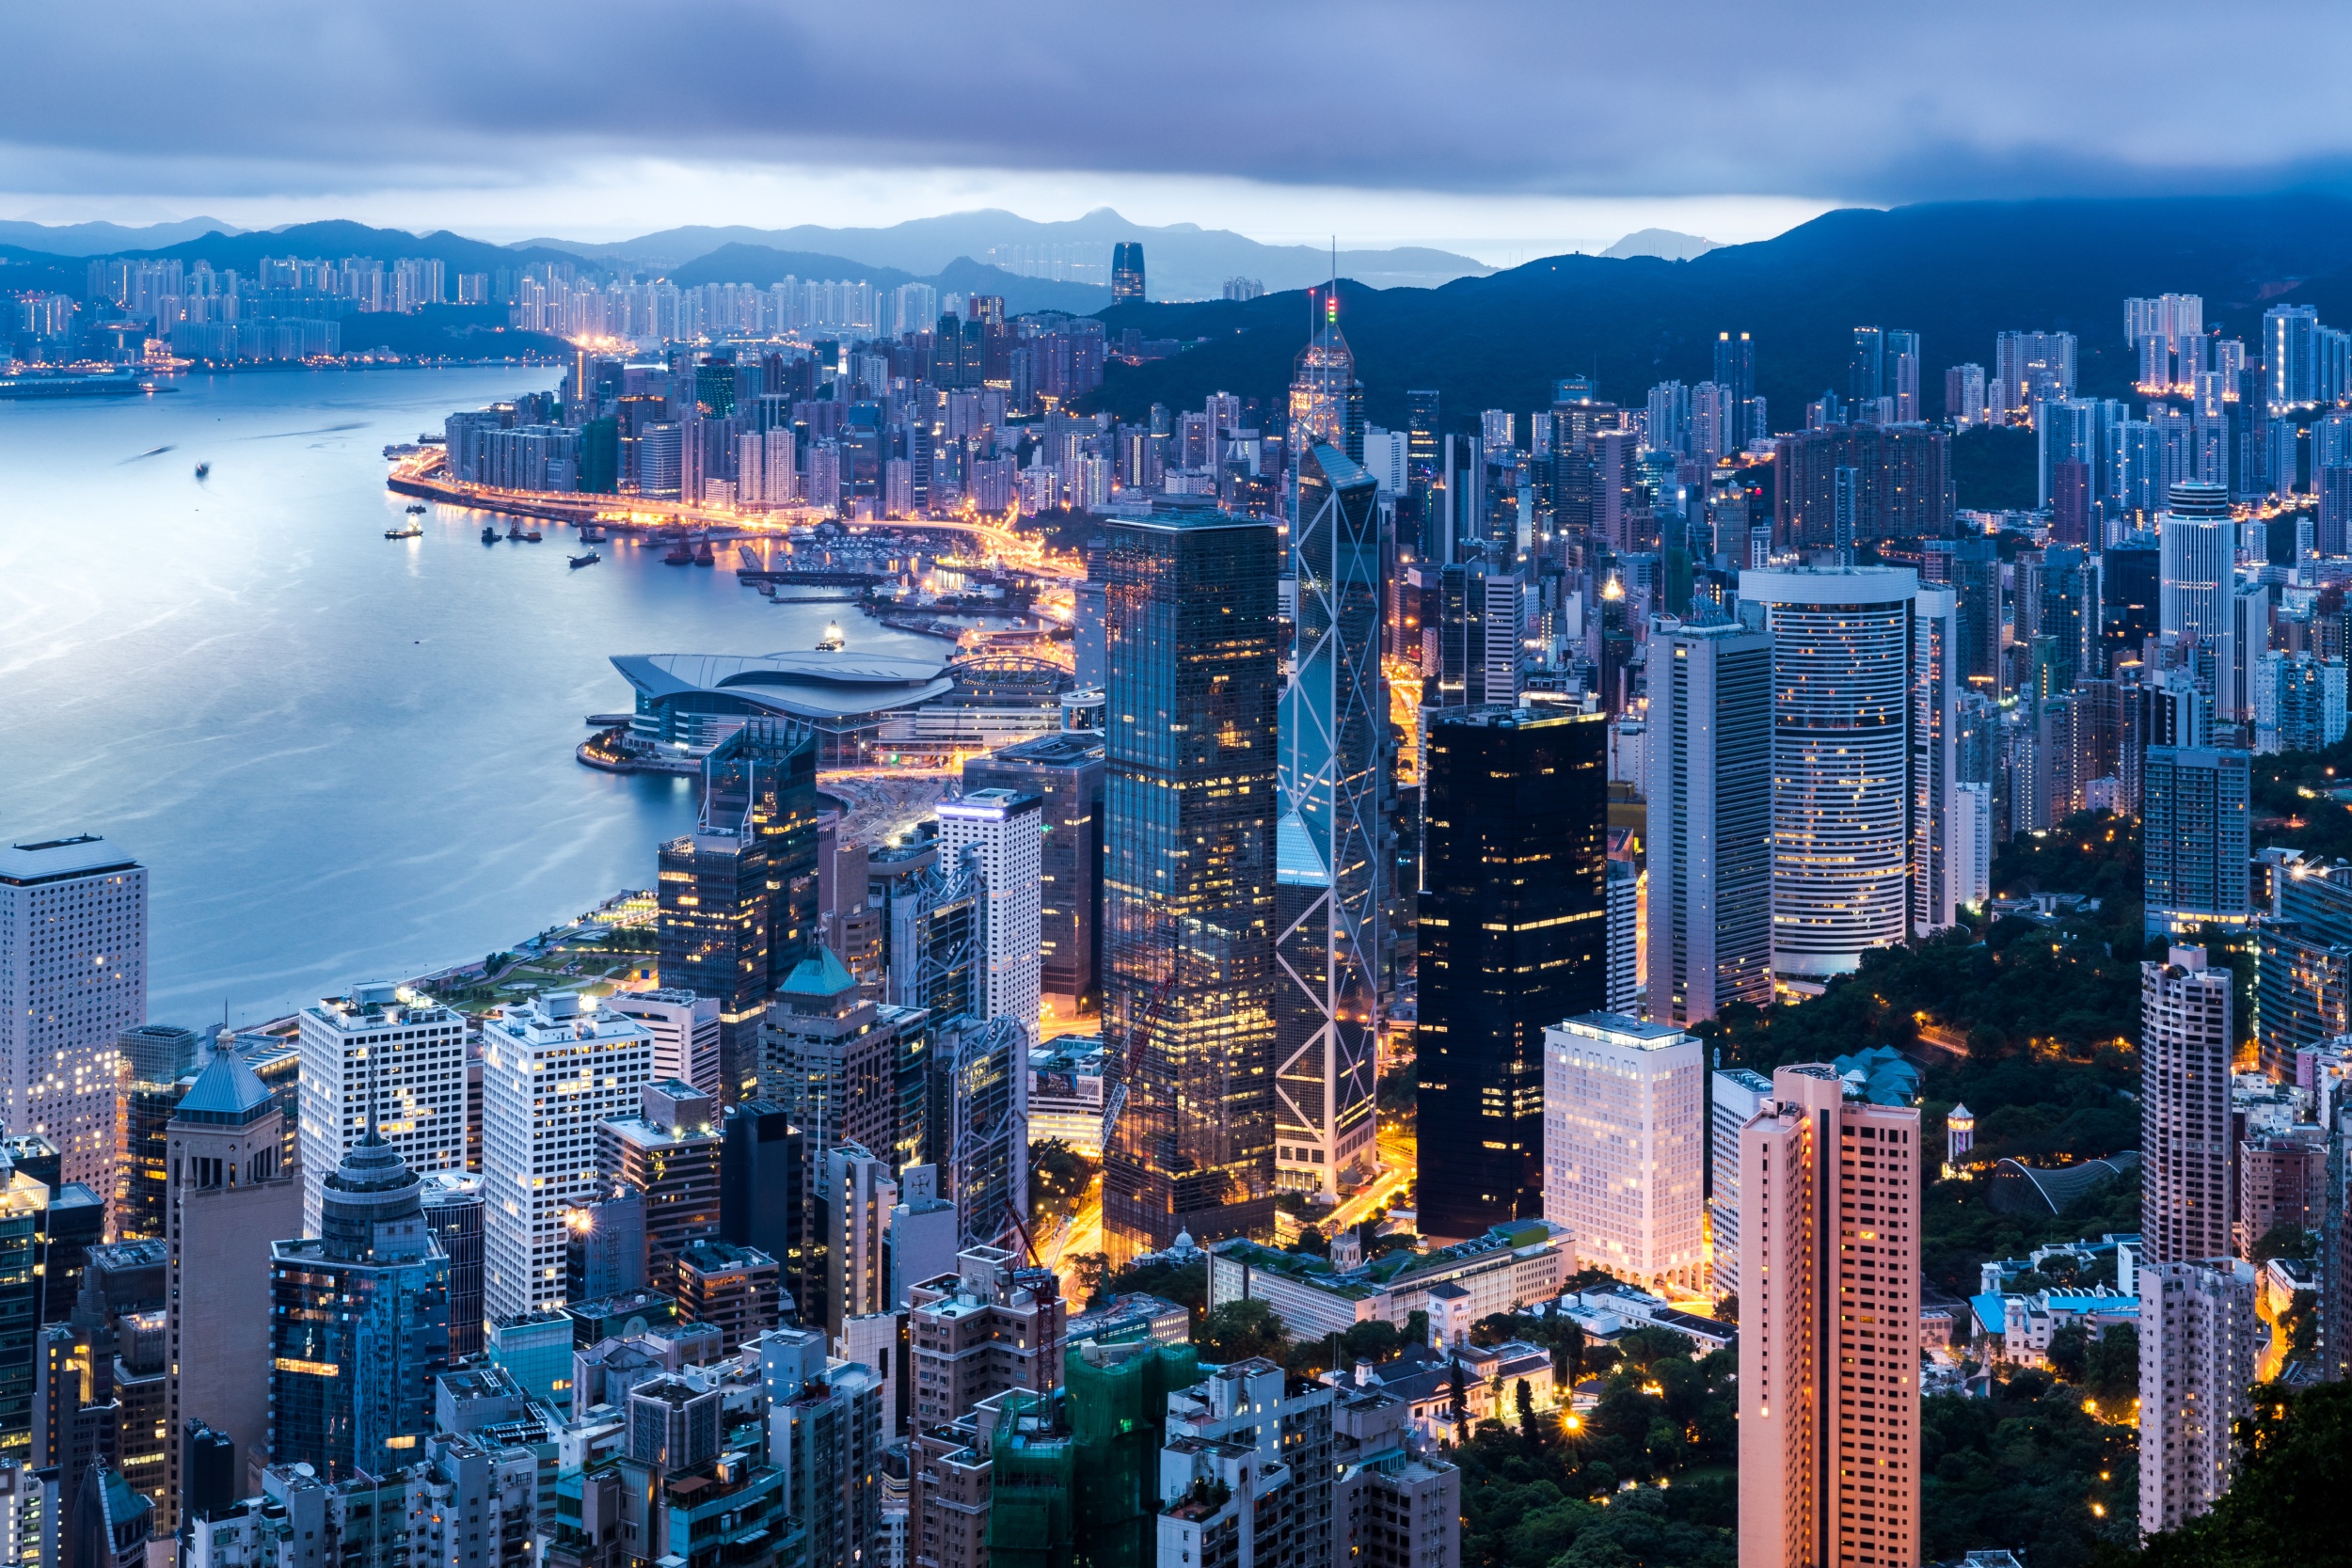 Hong Kong stock exchange: changes to equity-based awards take effect in 2023